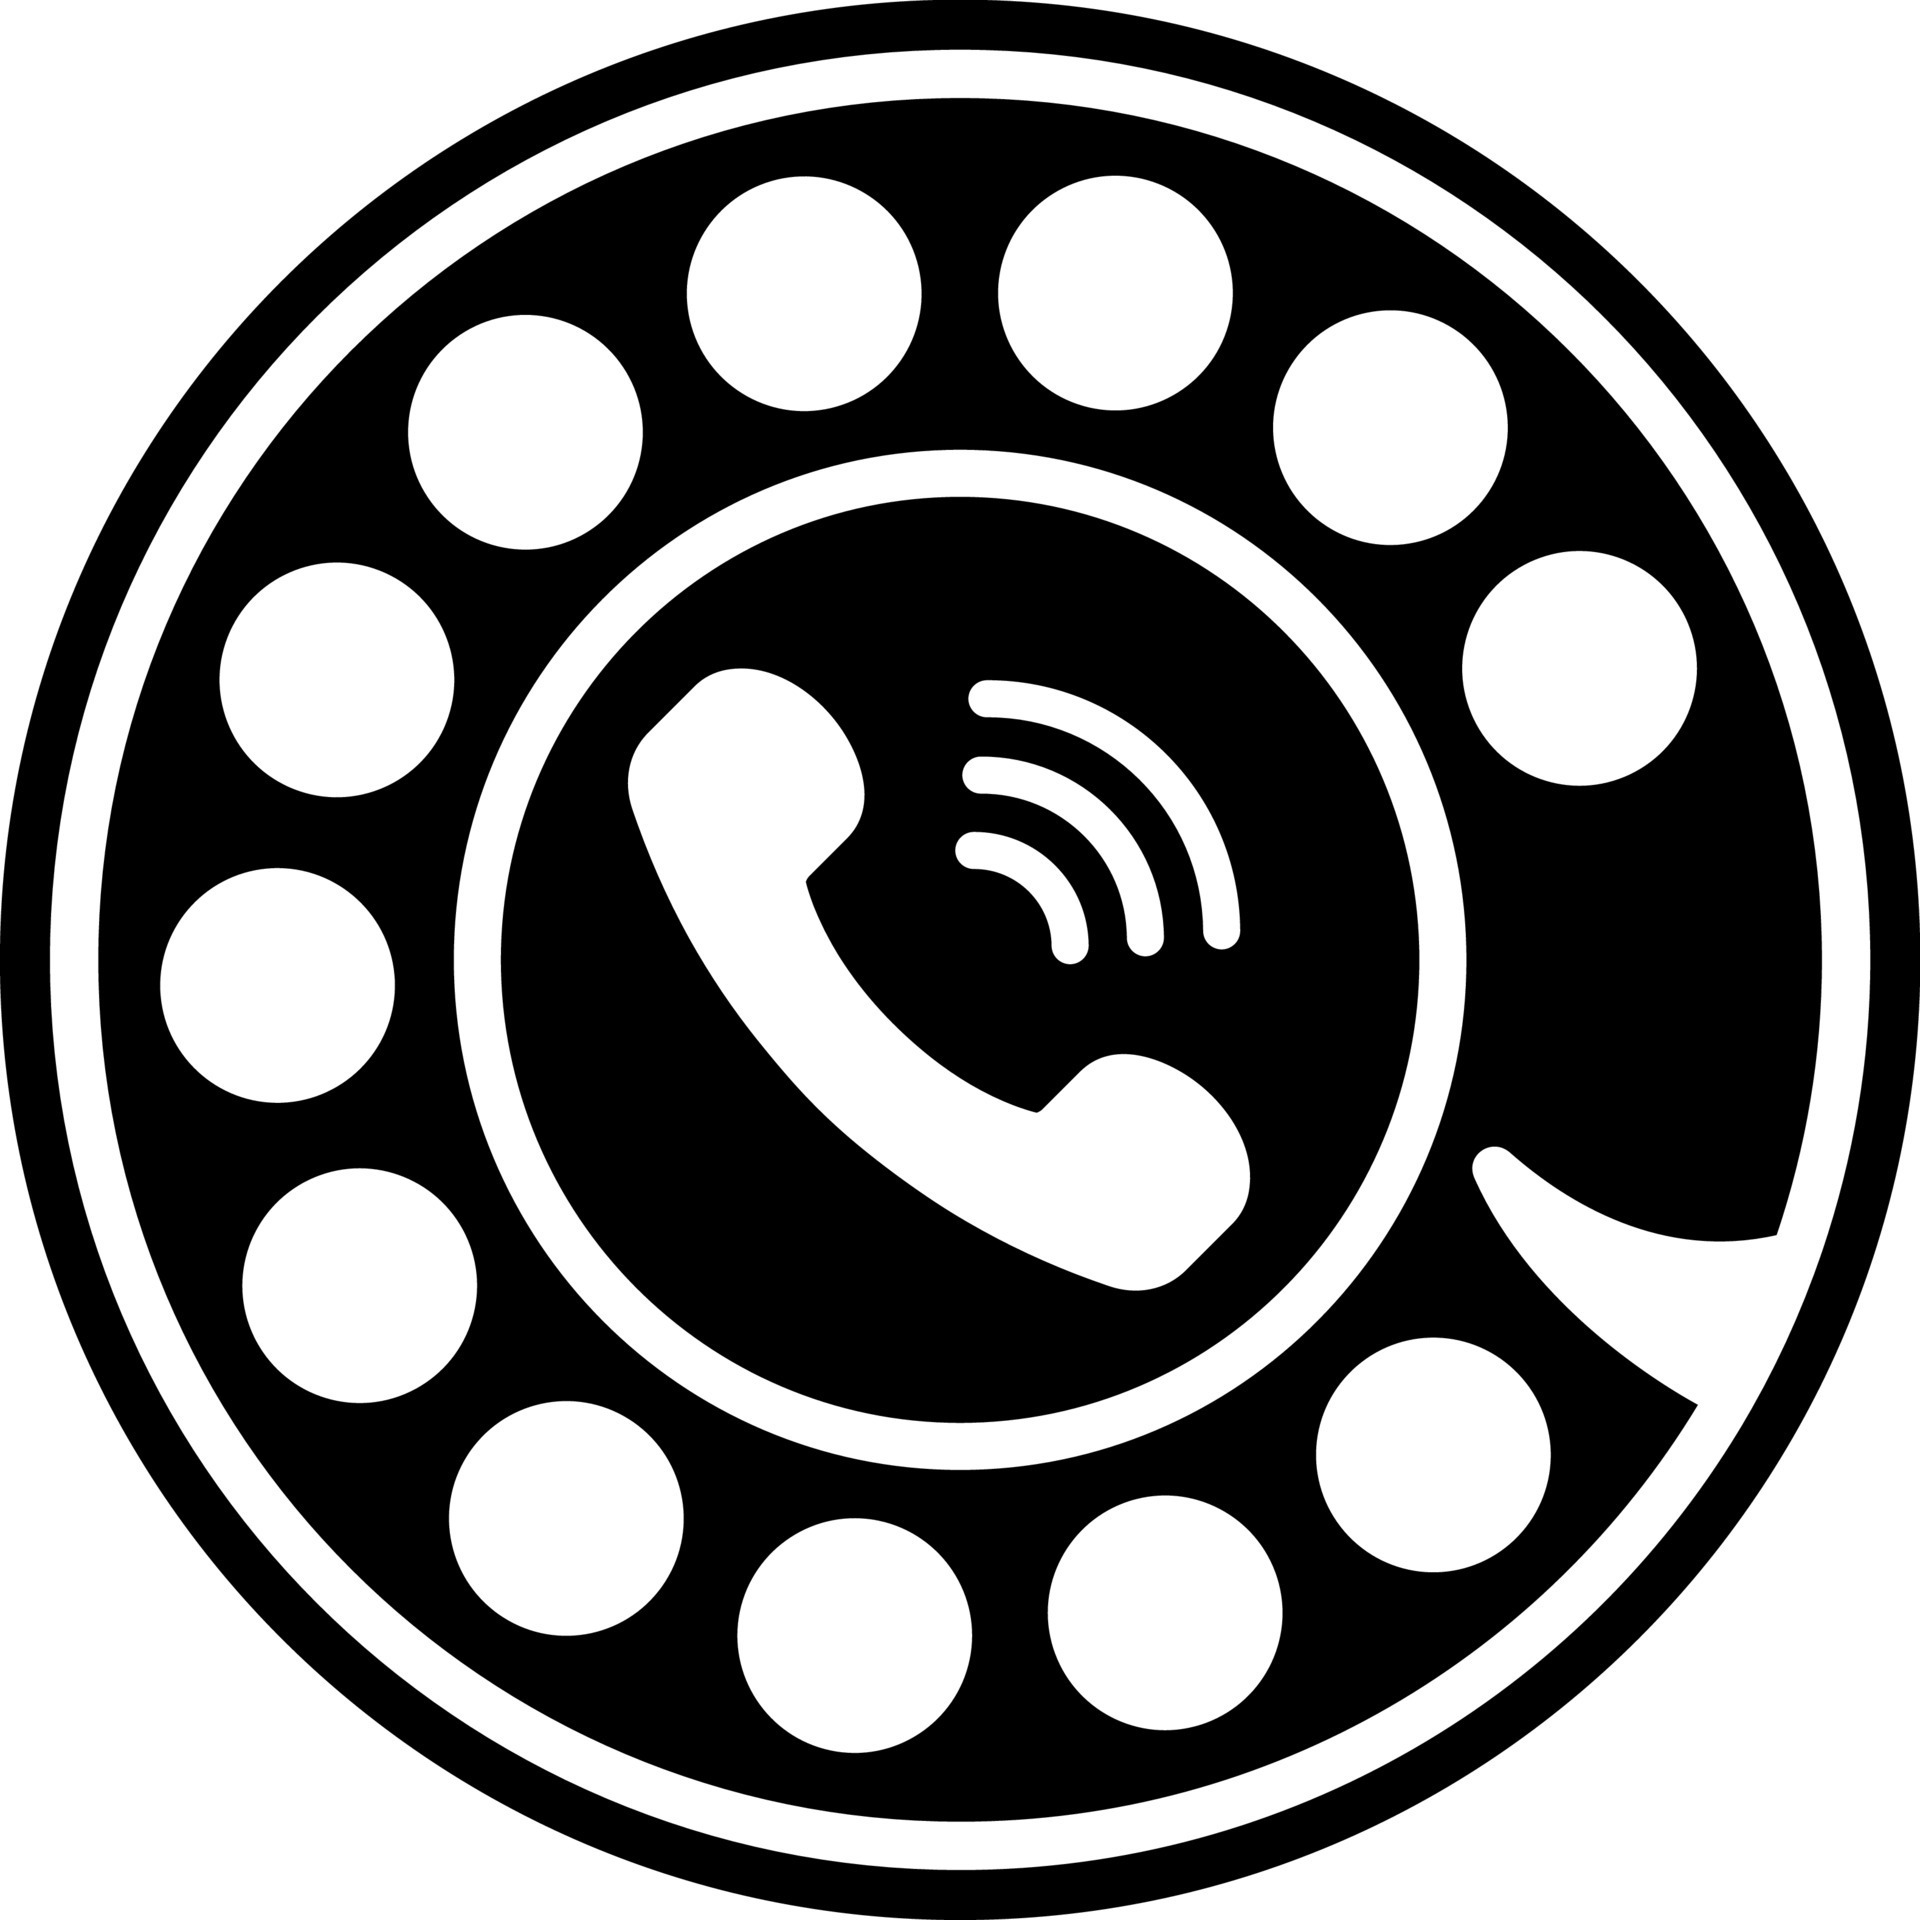 Rotary dial Royalty Free Vector Image - VectorStock